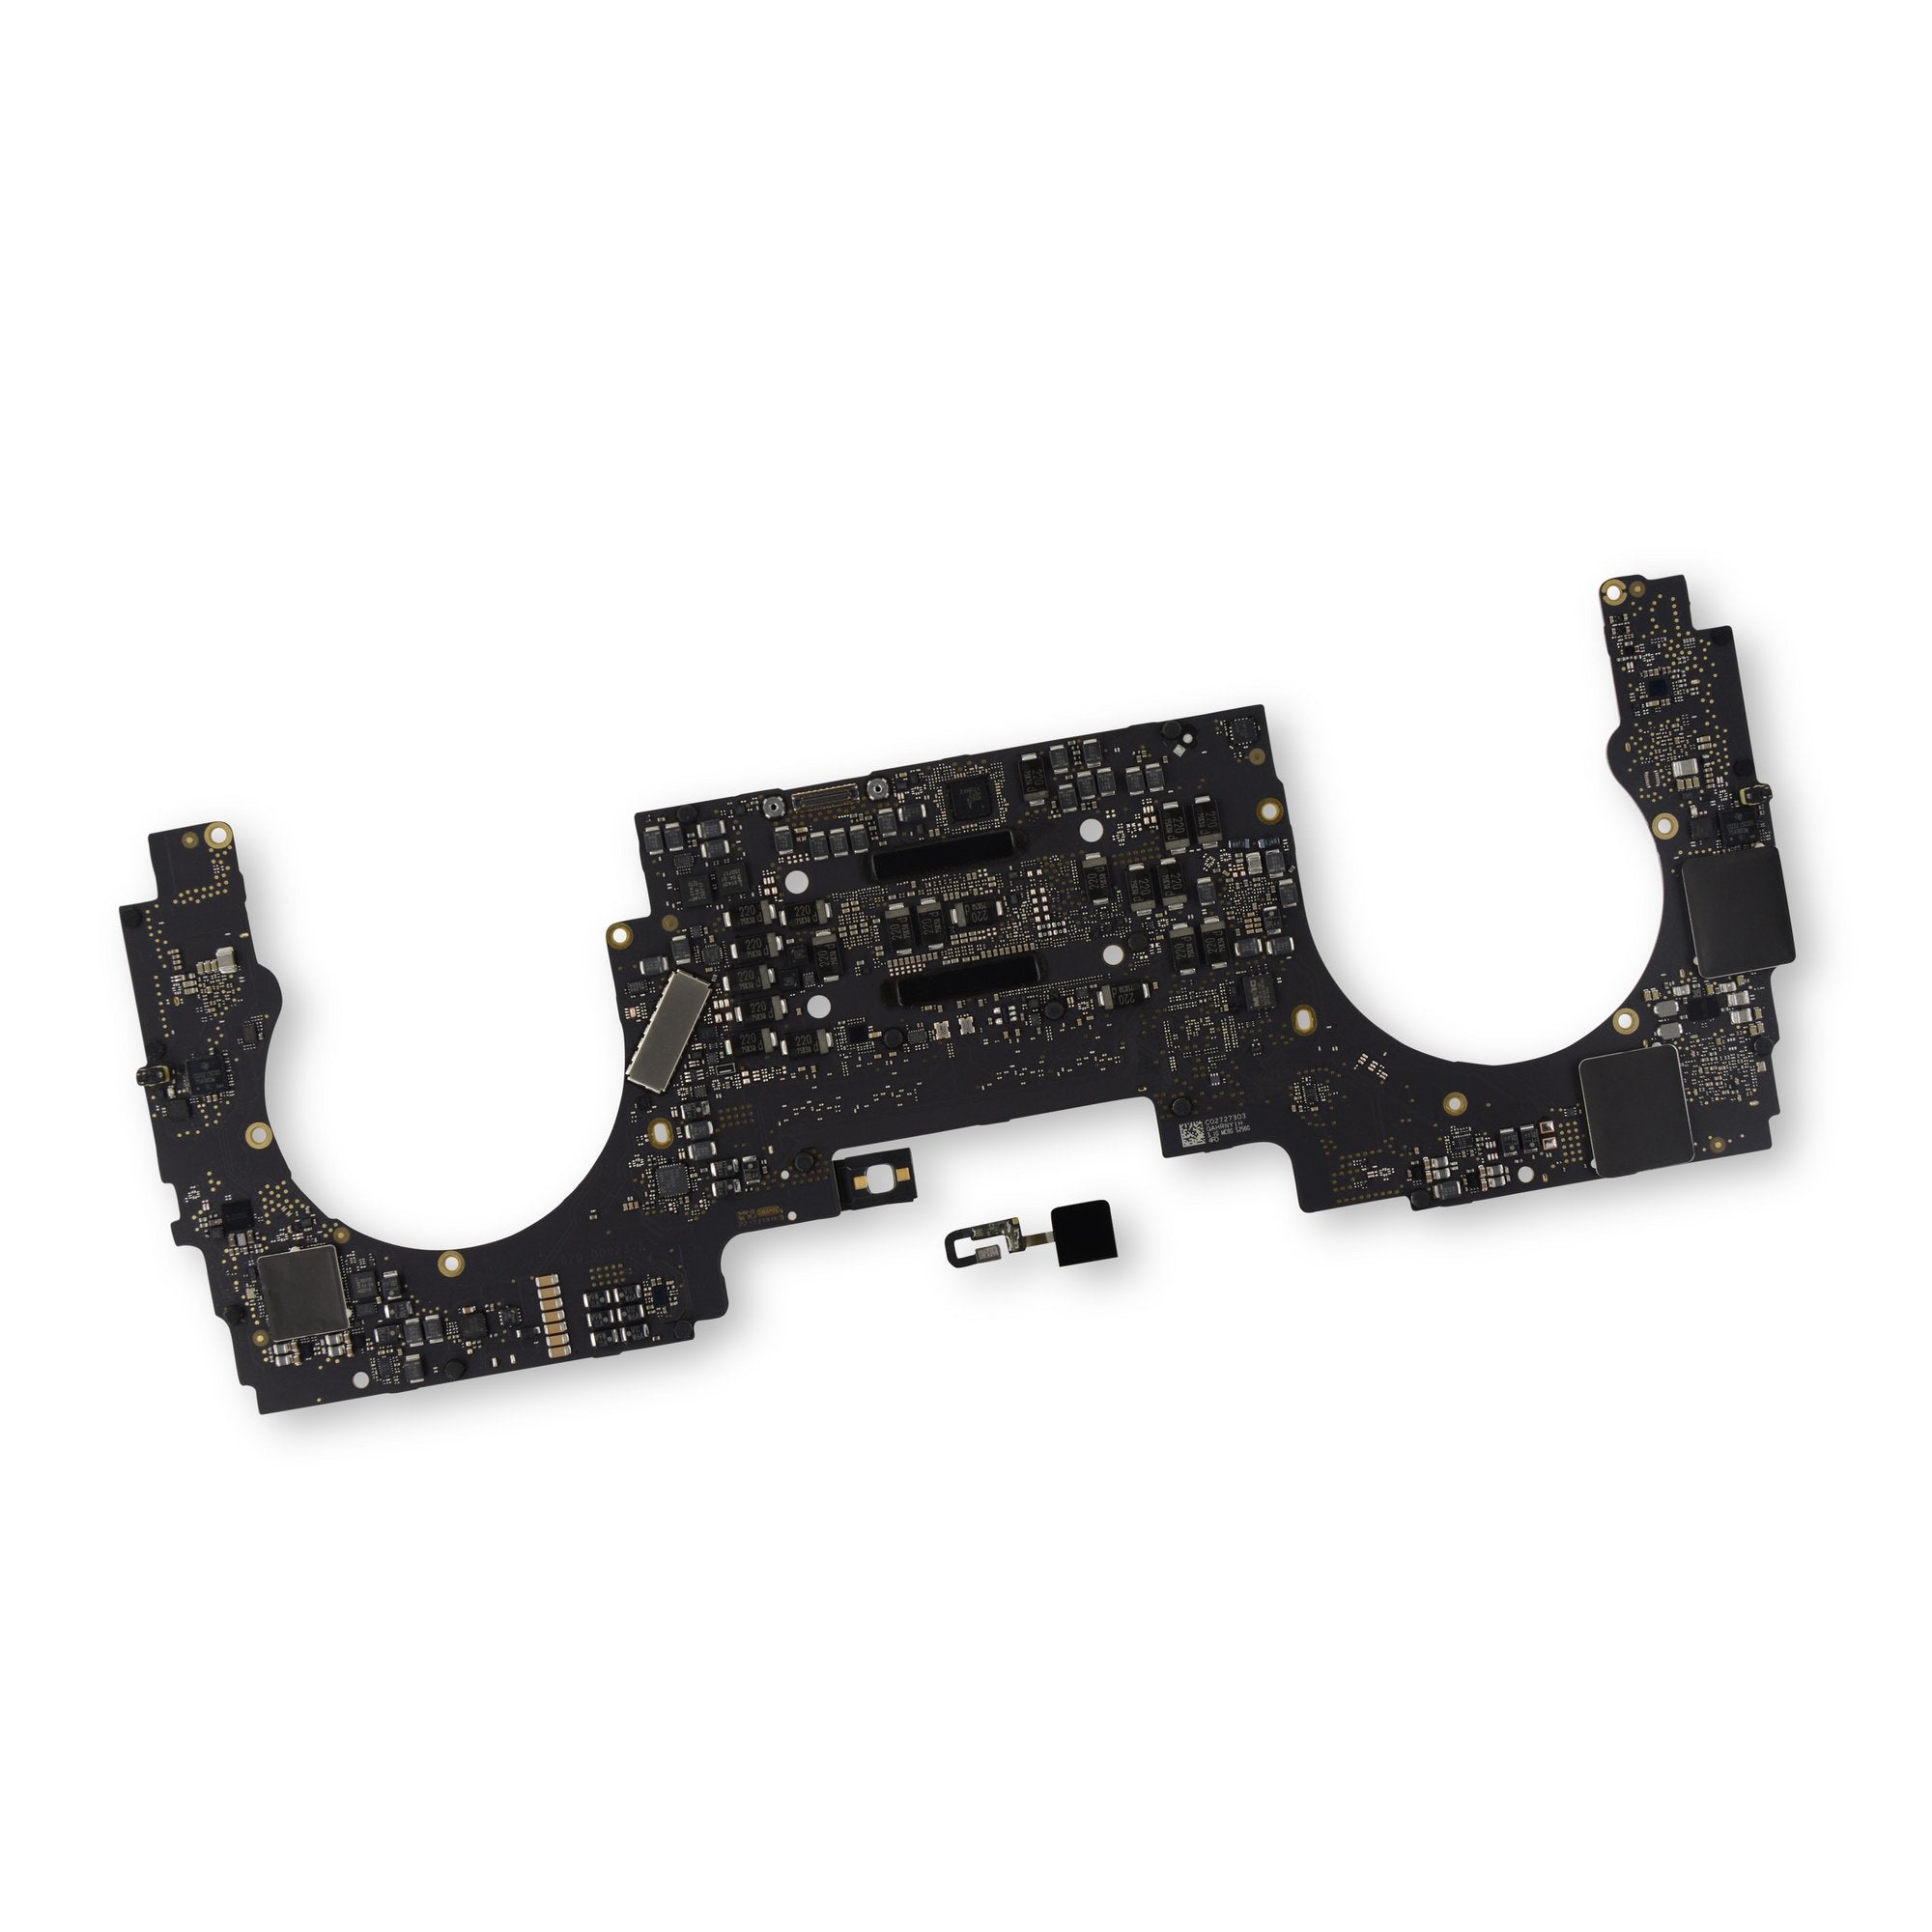 MacBook Pro 13" Retina (Touch Bar, 2017) 3.1 GHz Logic Board with Paired Touch ID Sensor